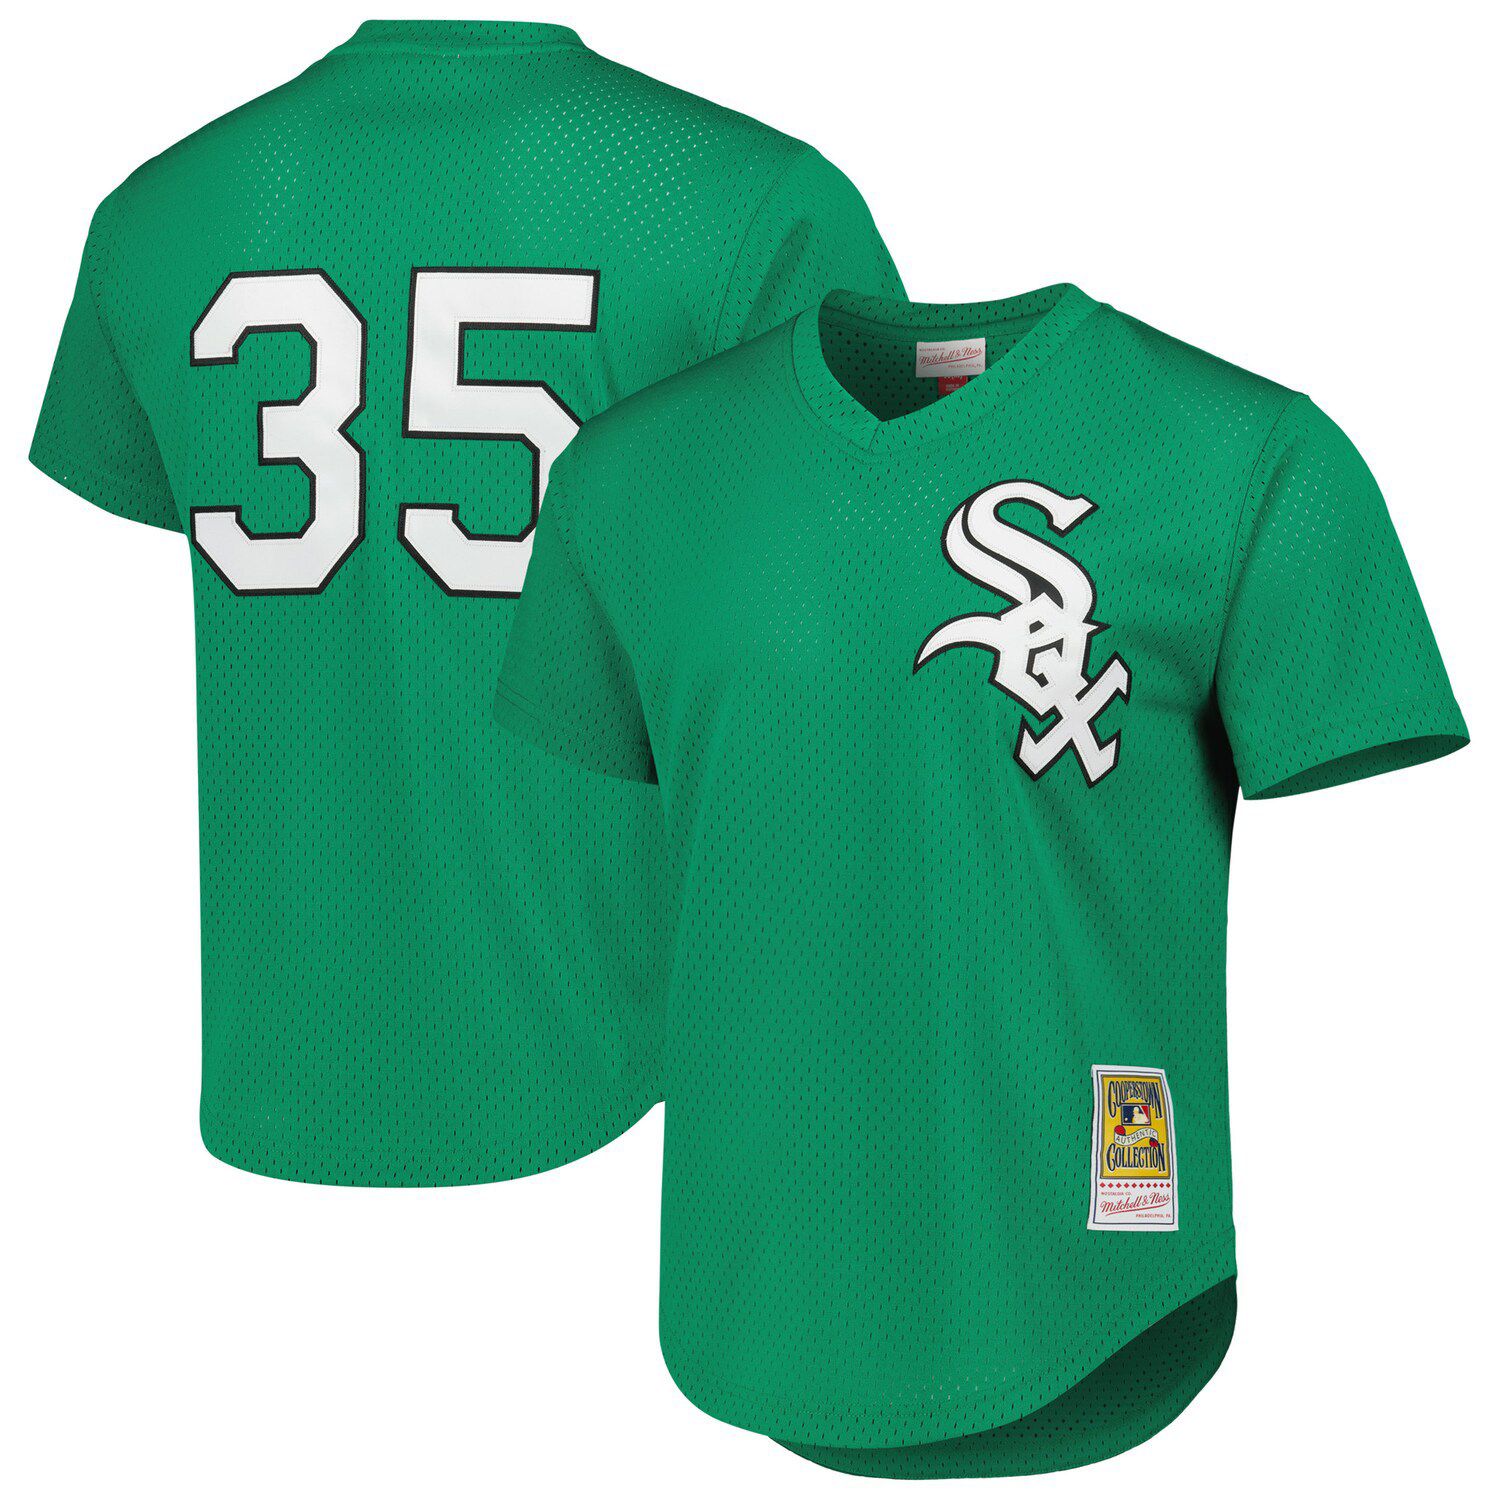 Chicago White Sox Stitches Cooperstown Collection V-Neck Team Color Jersey  - Navy/Red